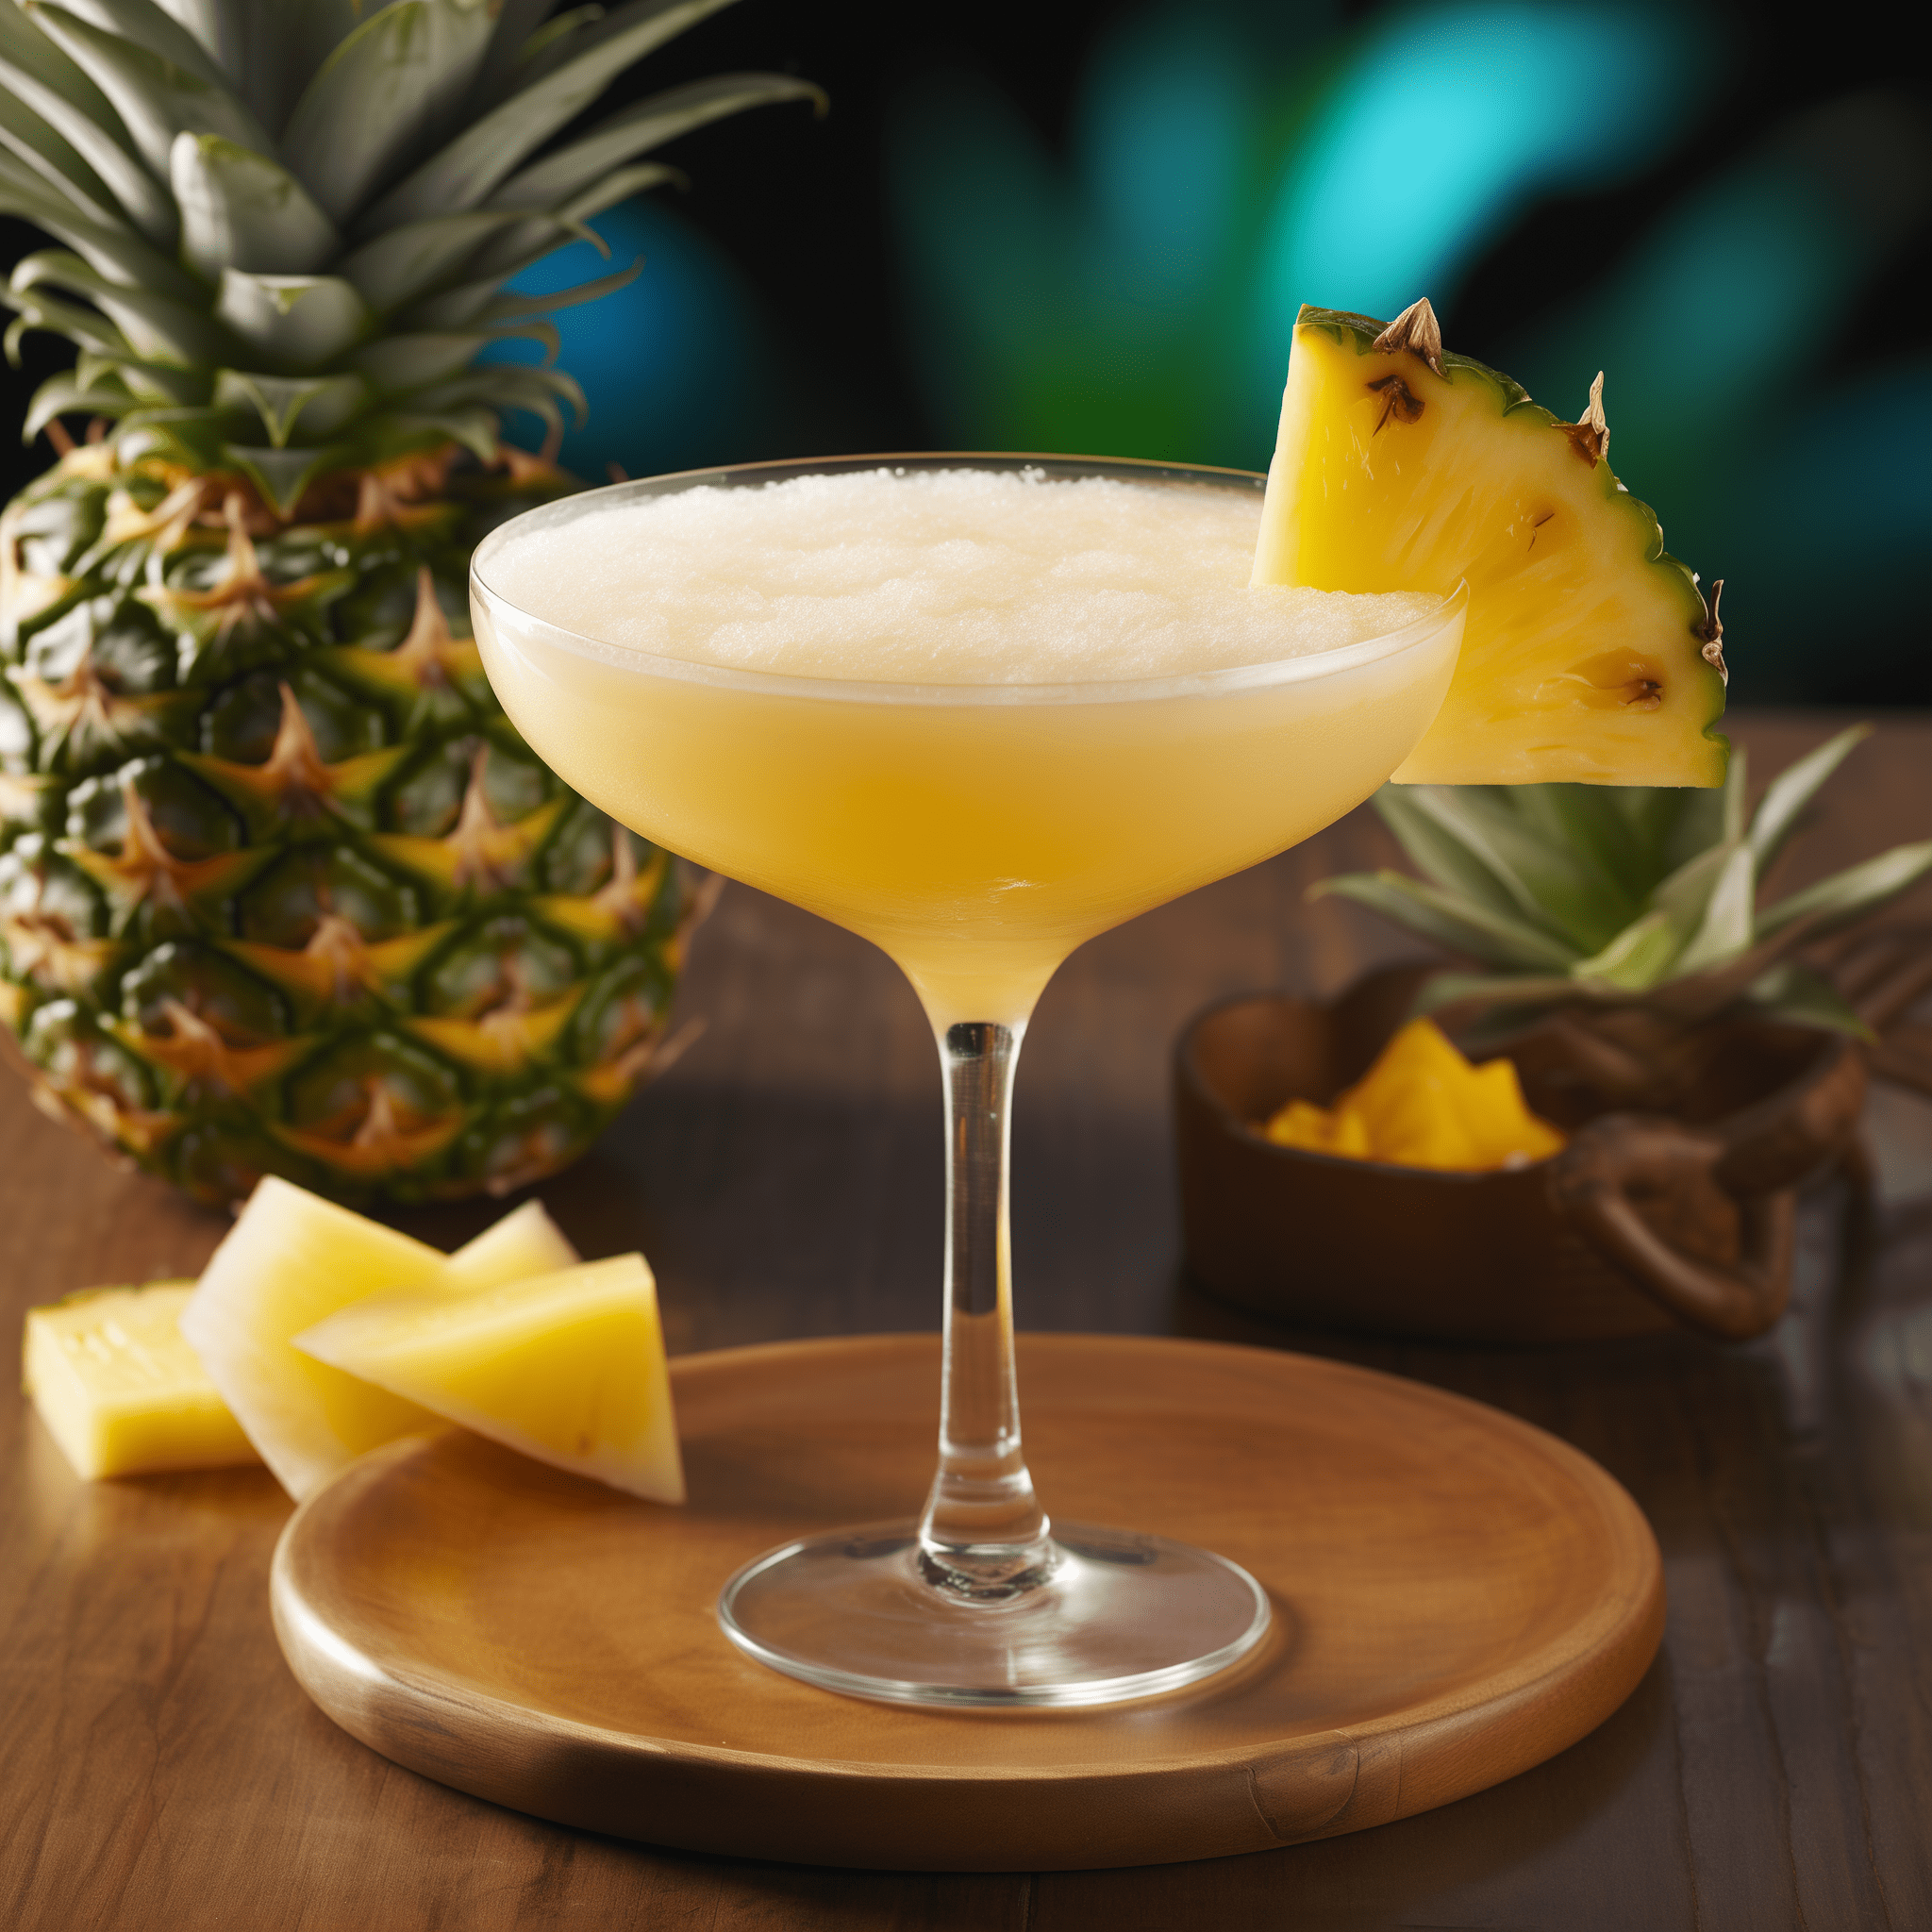 Malibu Pineapple Margarita Cocktail Recipe - The Malibu Pineapple Margarita is a delightful blend of sweet and tangy flavors with a creamy coconut undertone. It's refreshing, fruity, and has a light boozy kick that's not too overpowering.